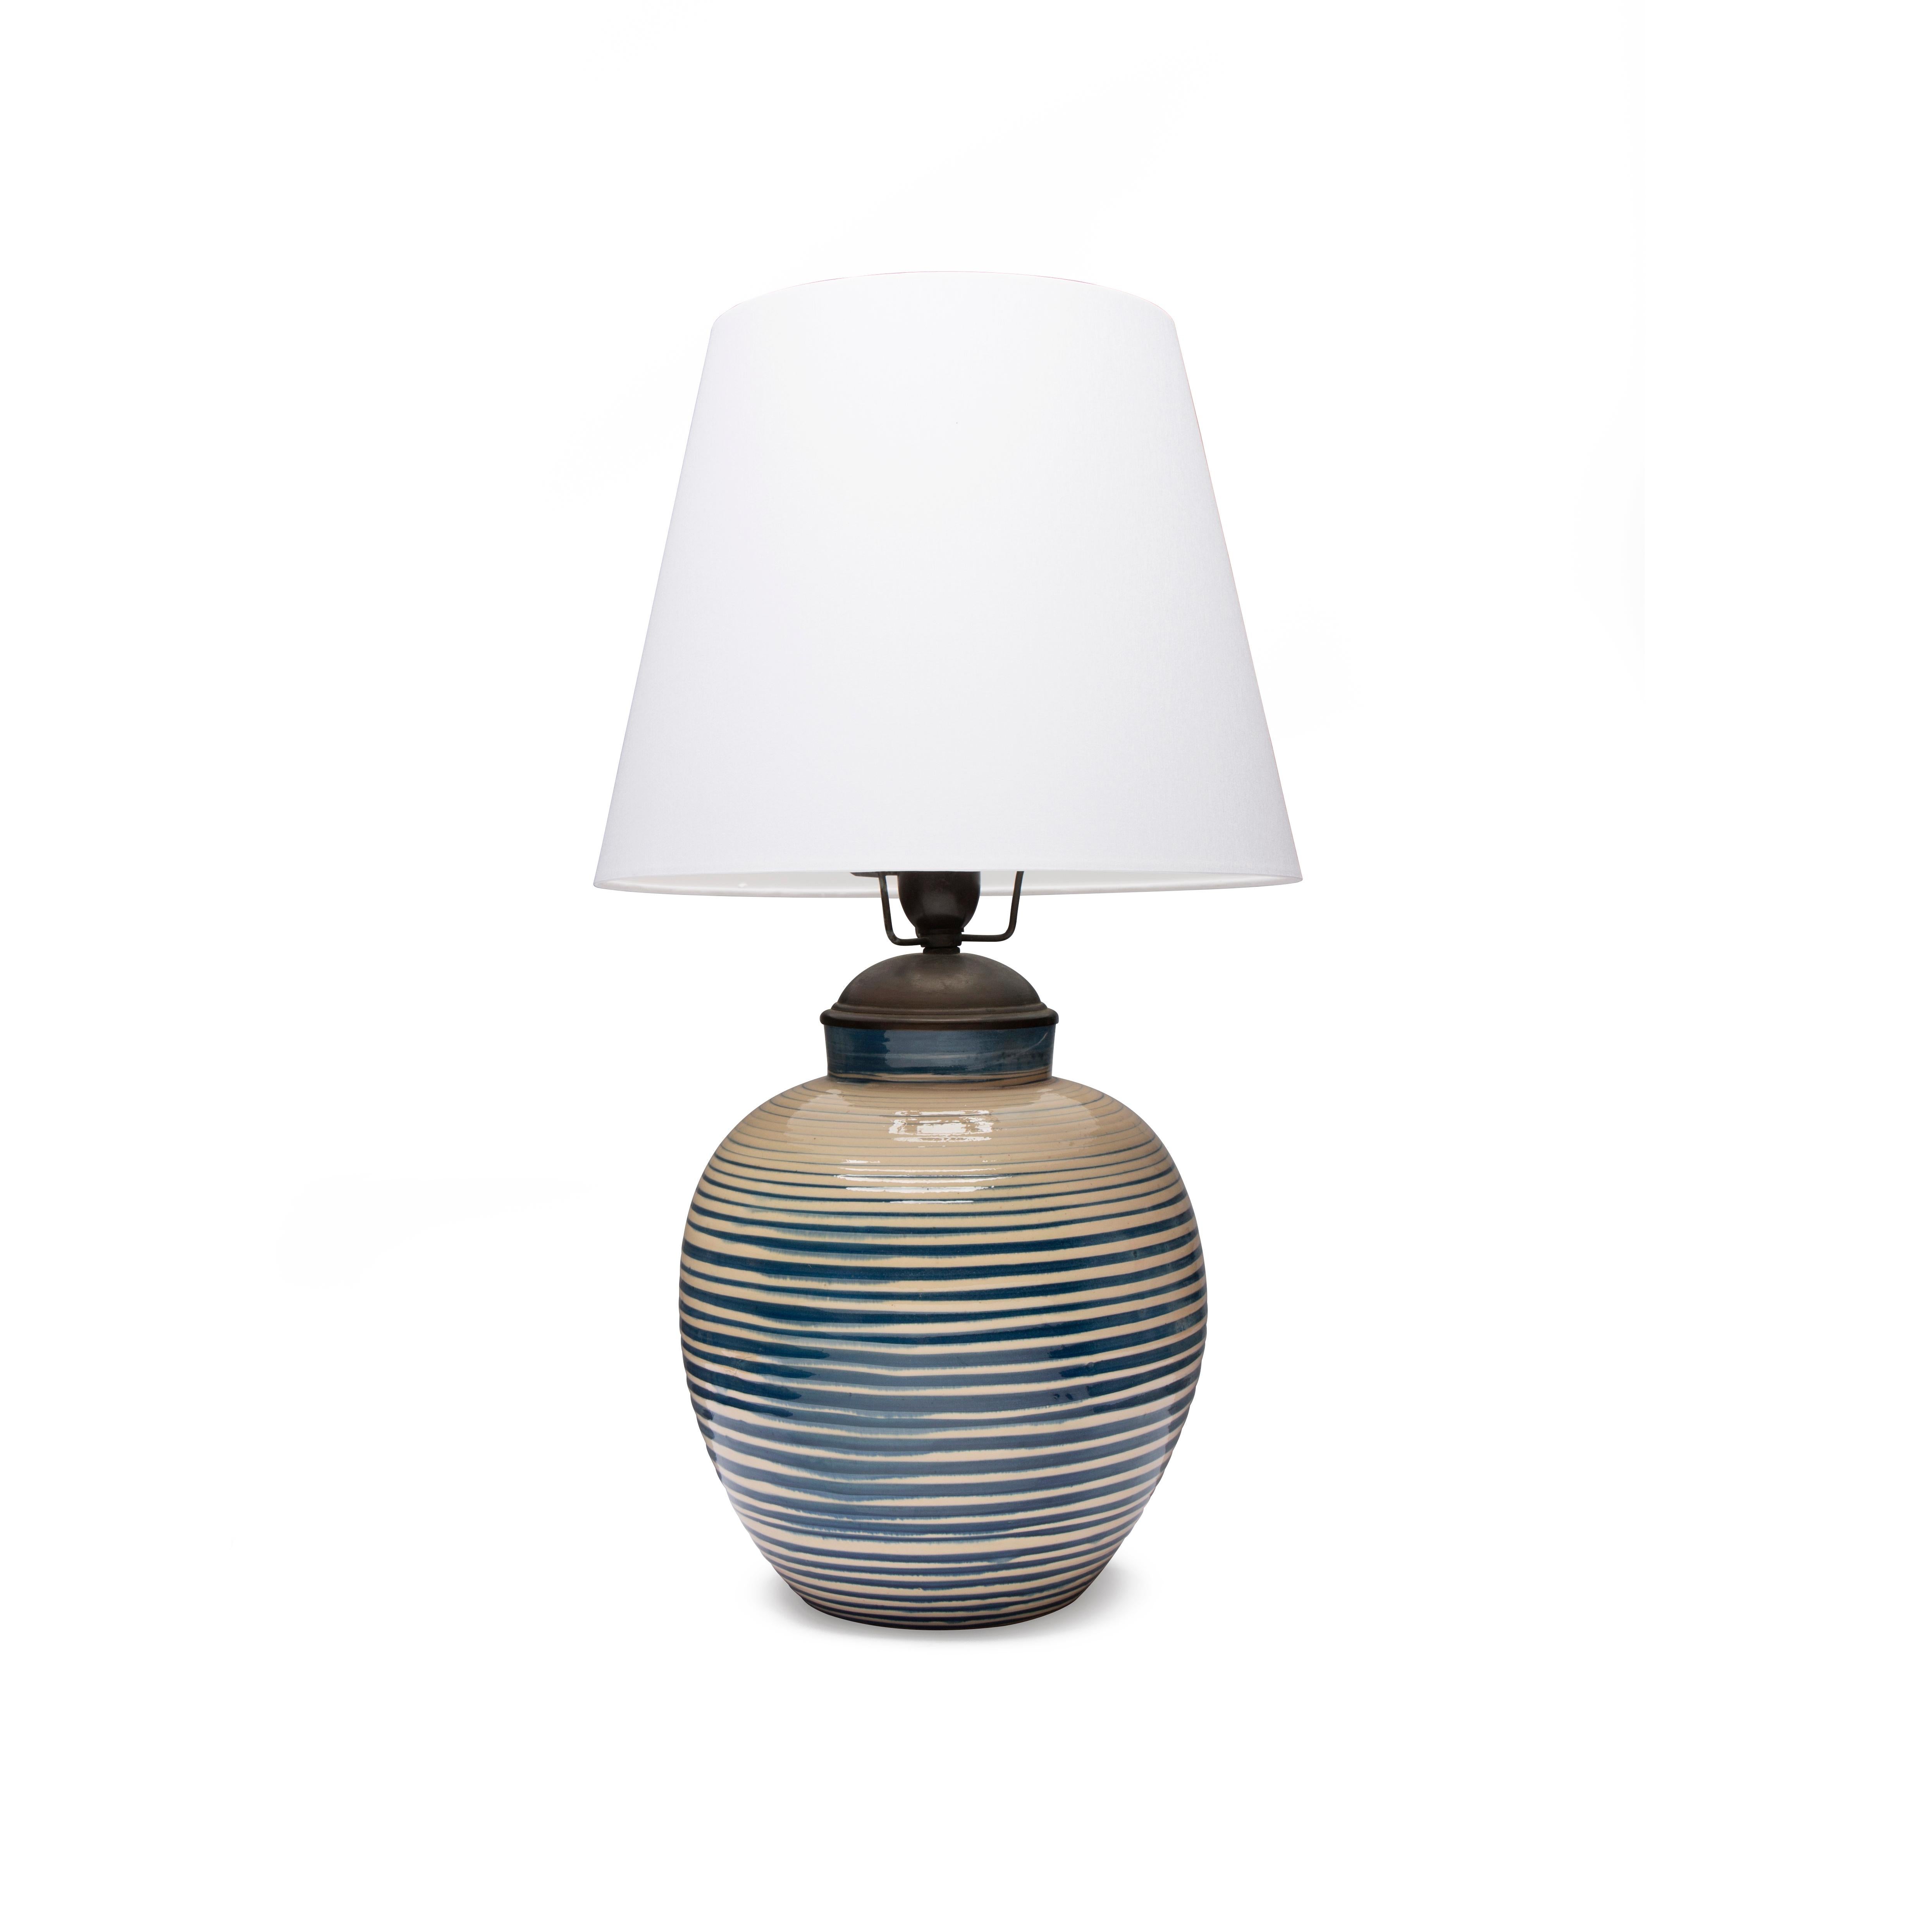 Danish Large round table lamp with horizontal blue stripes on a creamy background For Sale